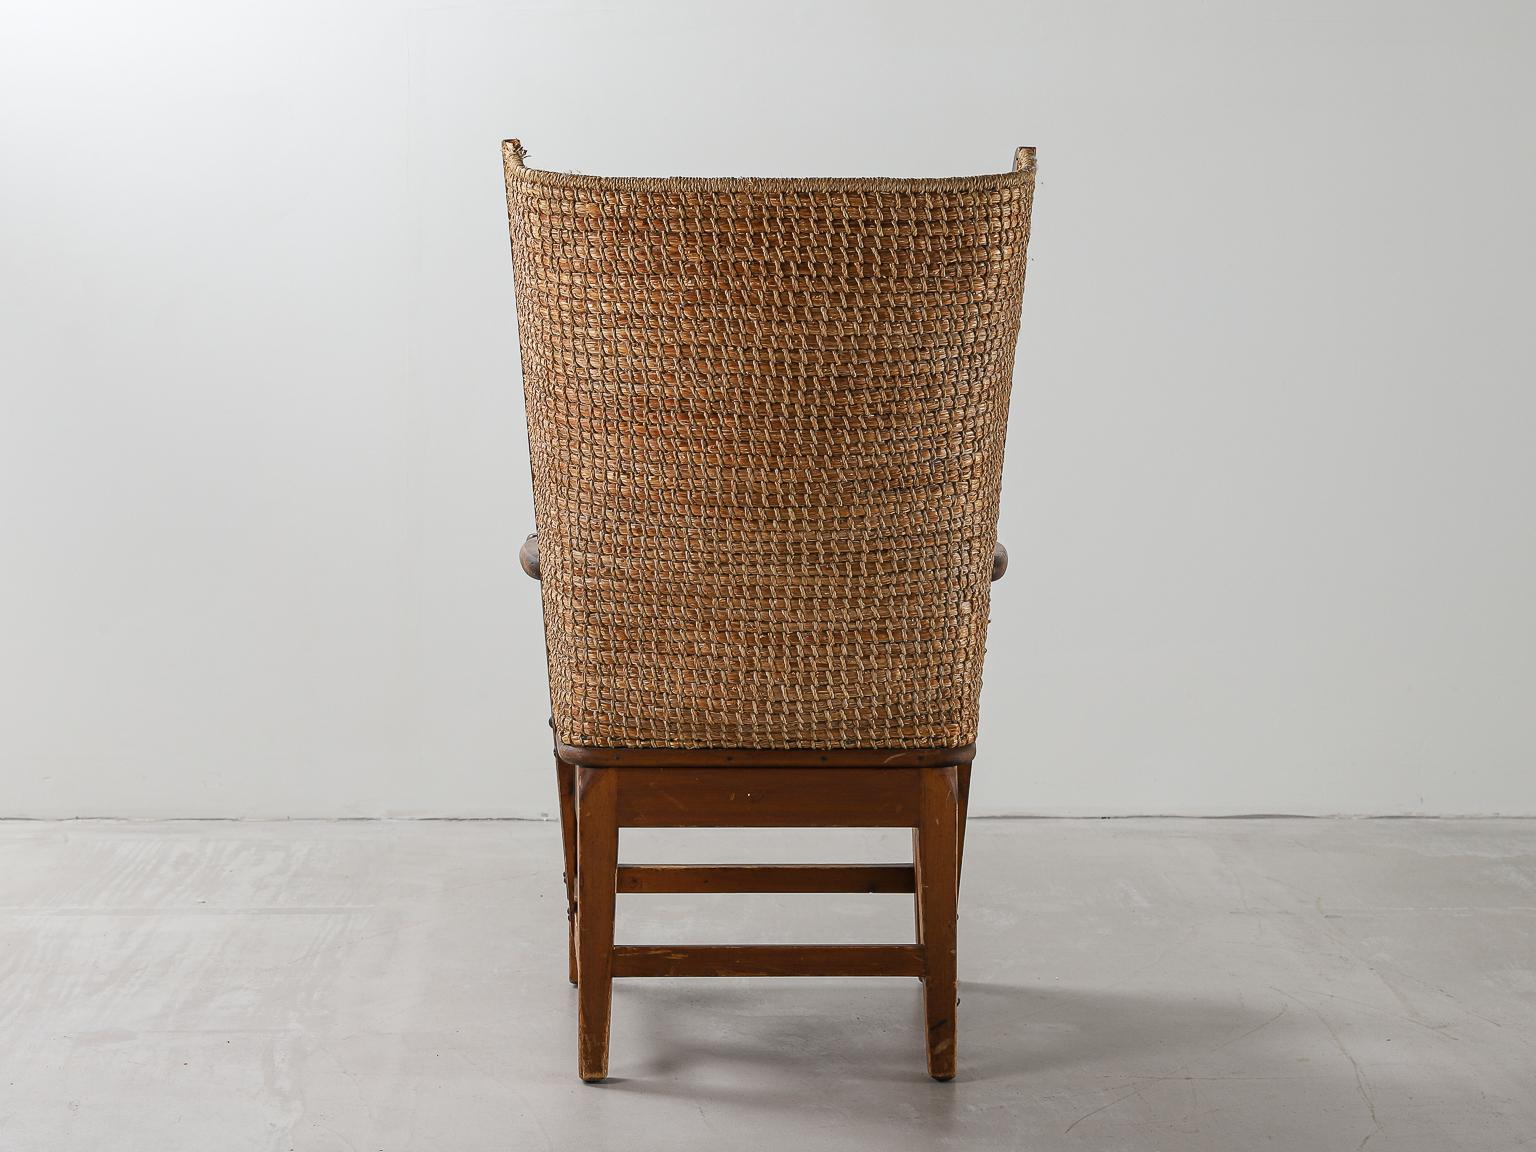 Scottish Late 19th Early 20th Century Wood and Oat Straw Orkney Chair In Good Condition In London, Charterhouse Square